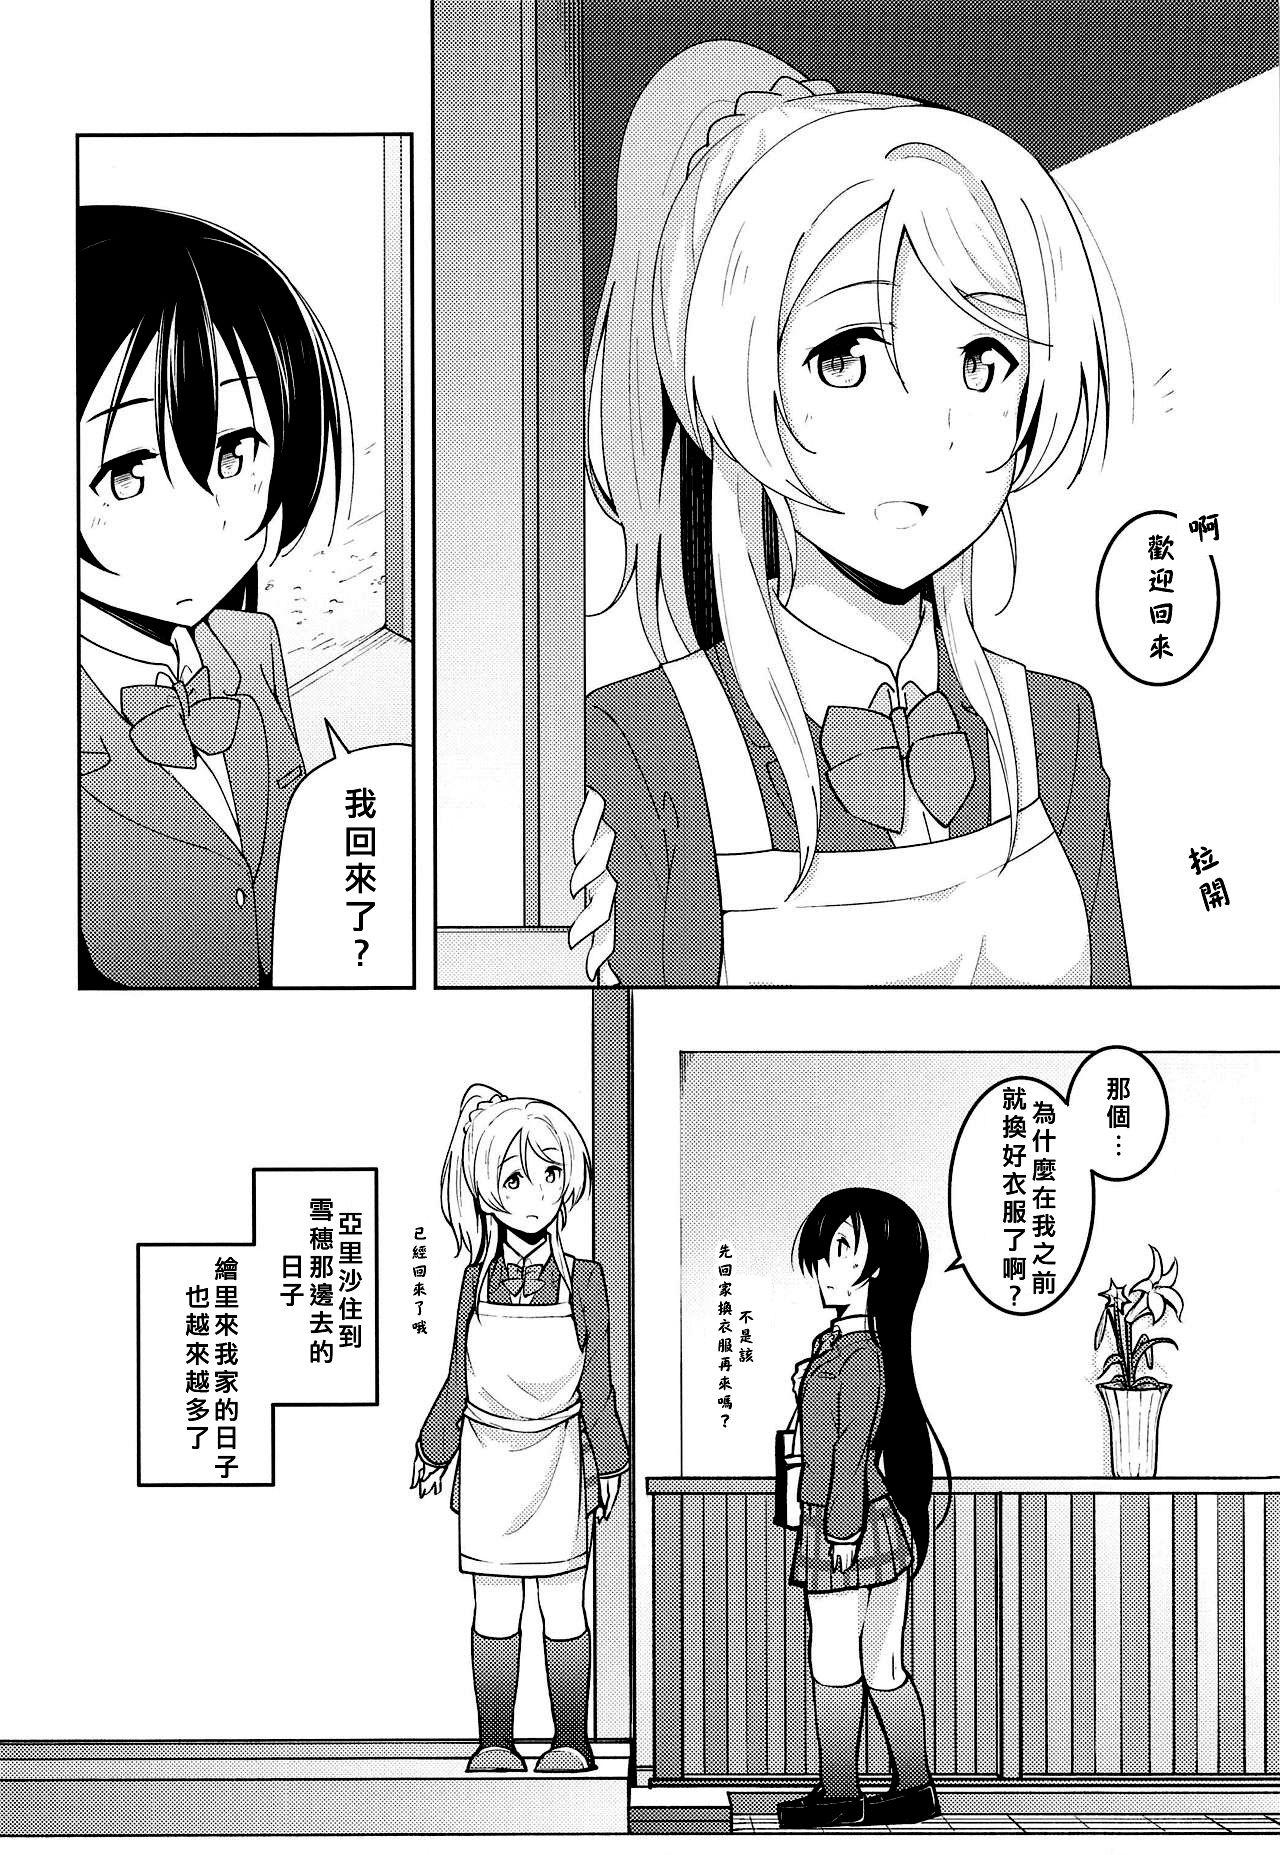 Spycam Staring Fragrance - Love live Ex Girlfriends - Page 8